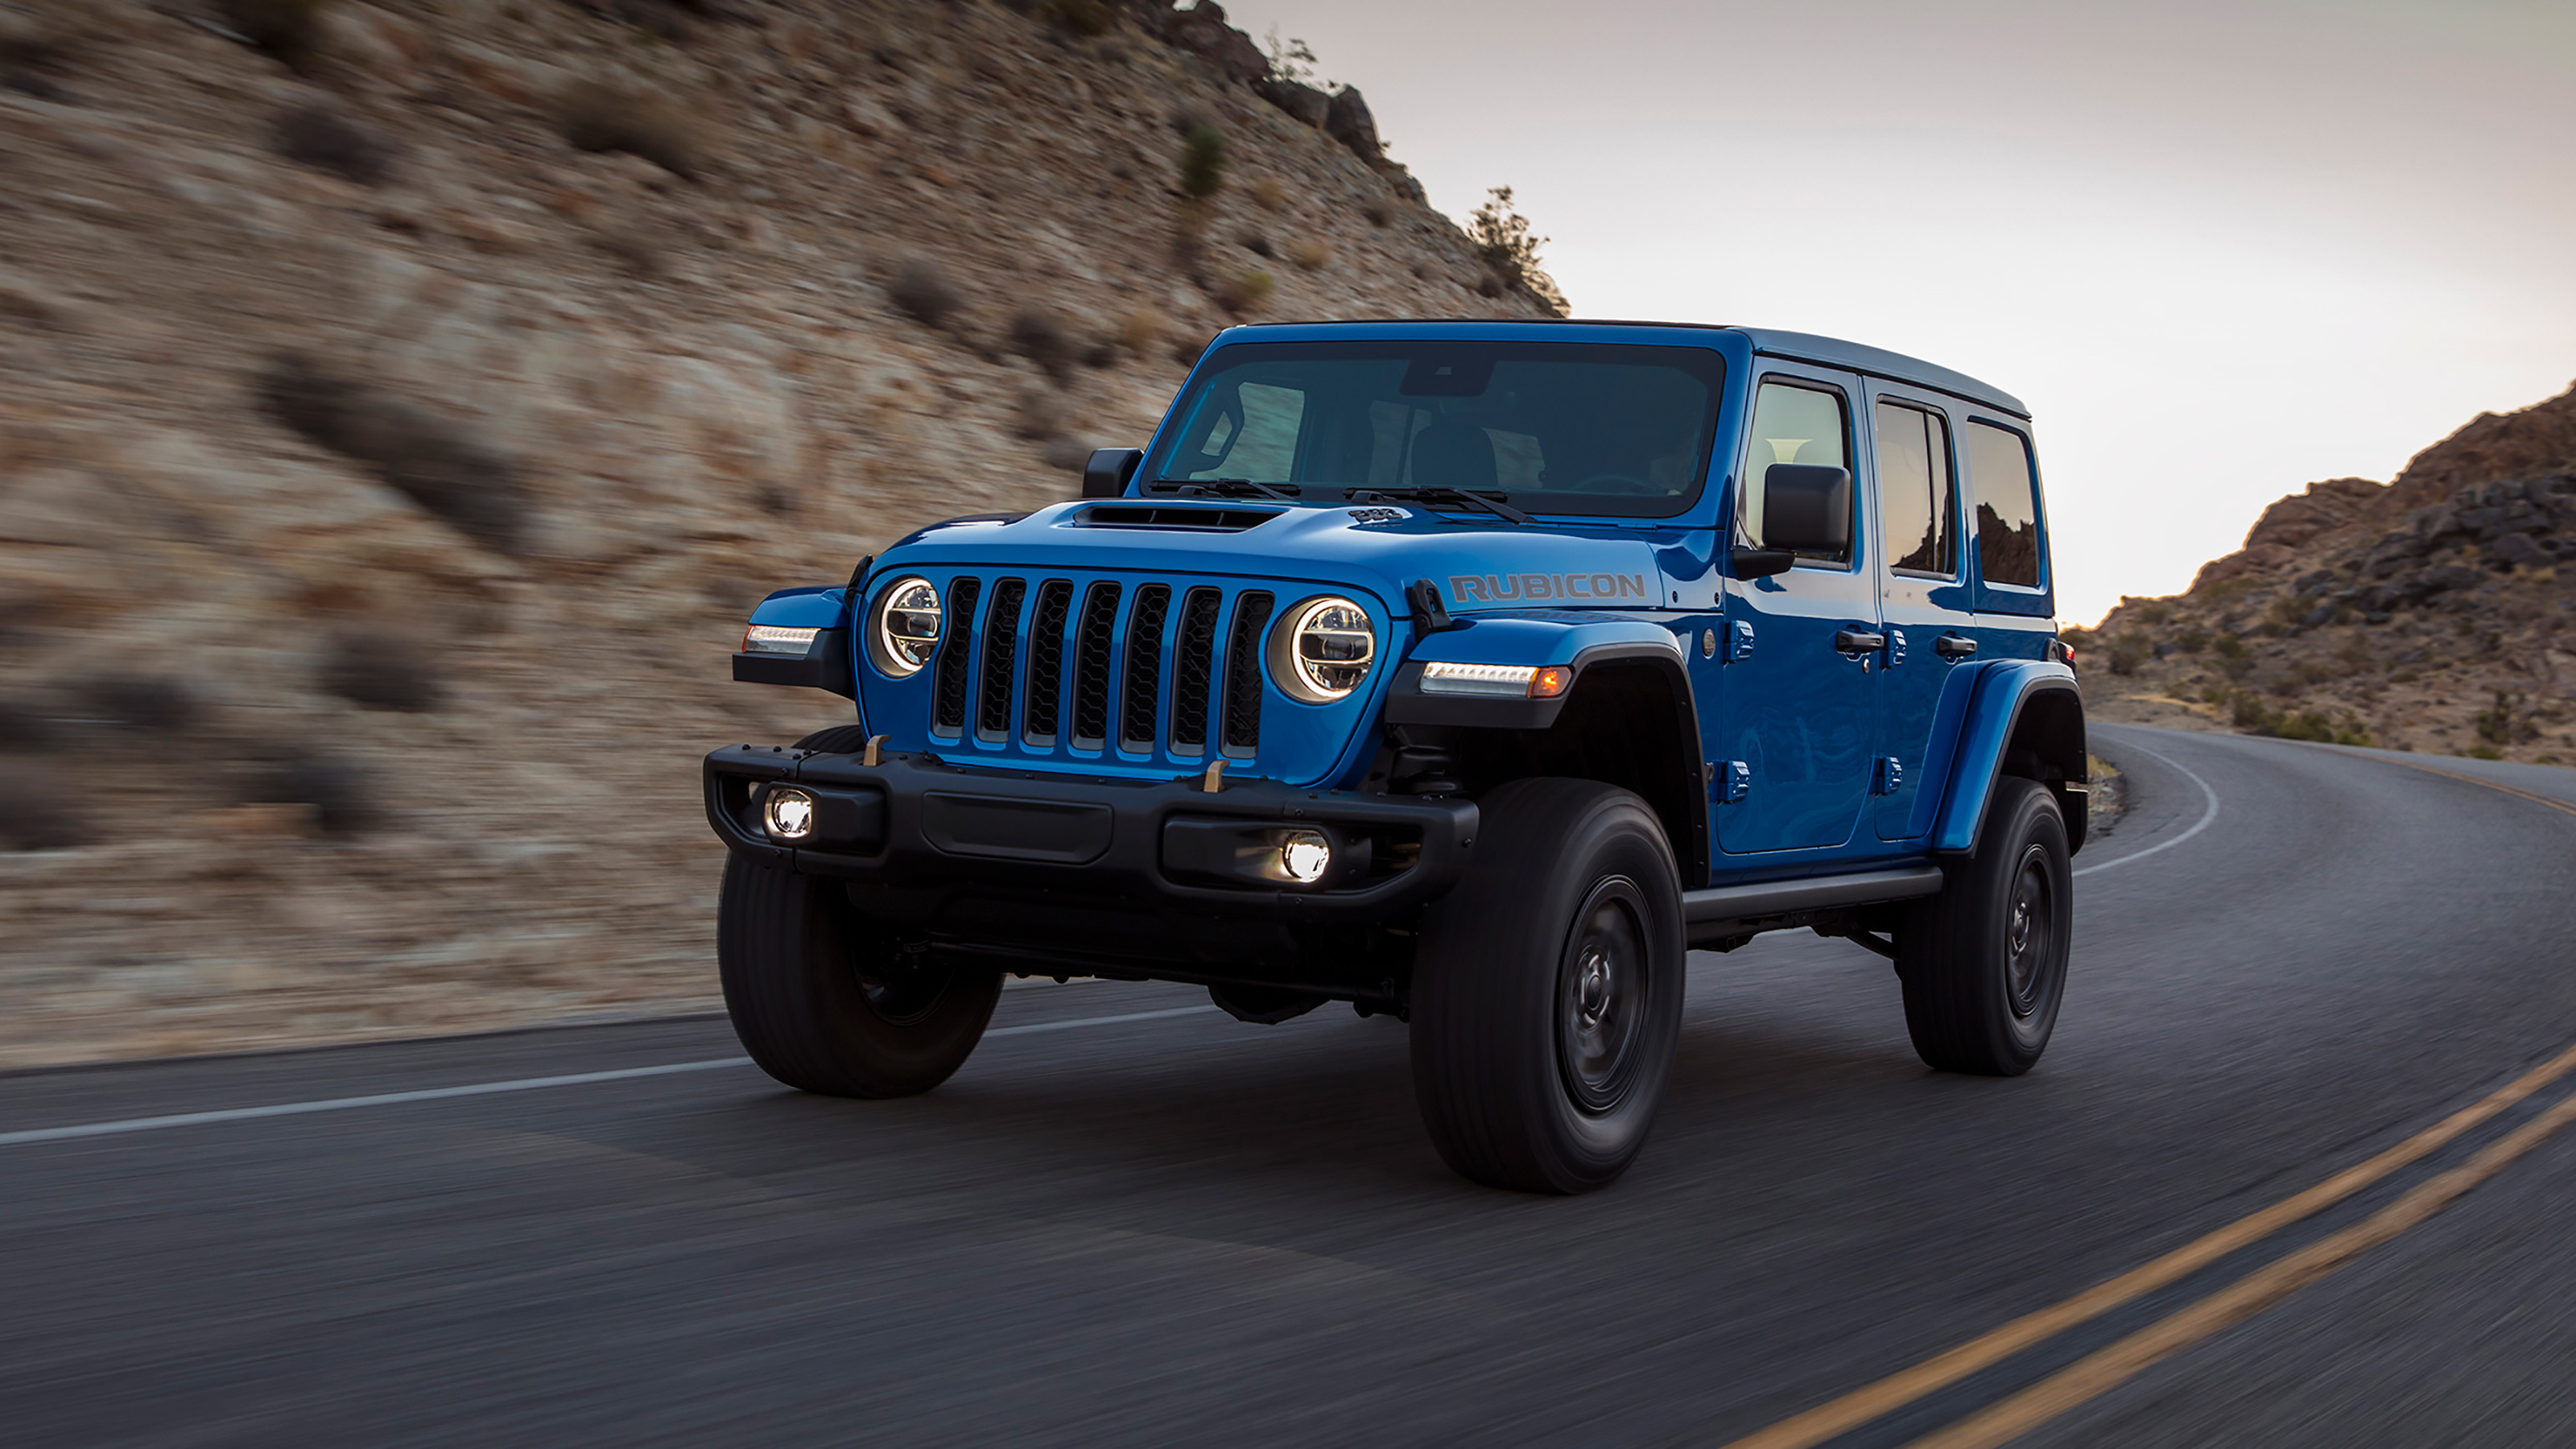 New V8powered Jeep Wrangler Rubicon 392 launched Auto